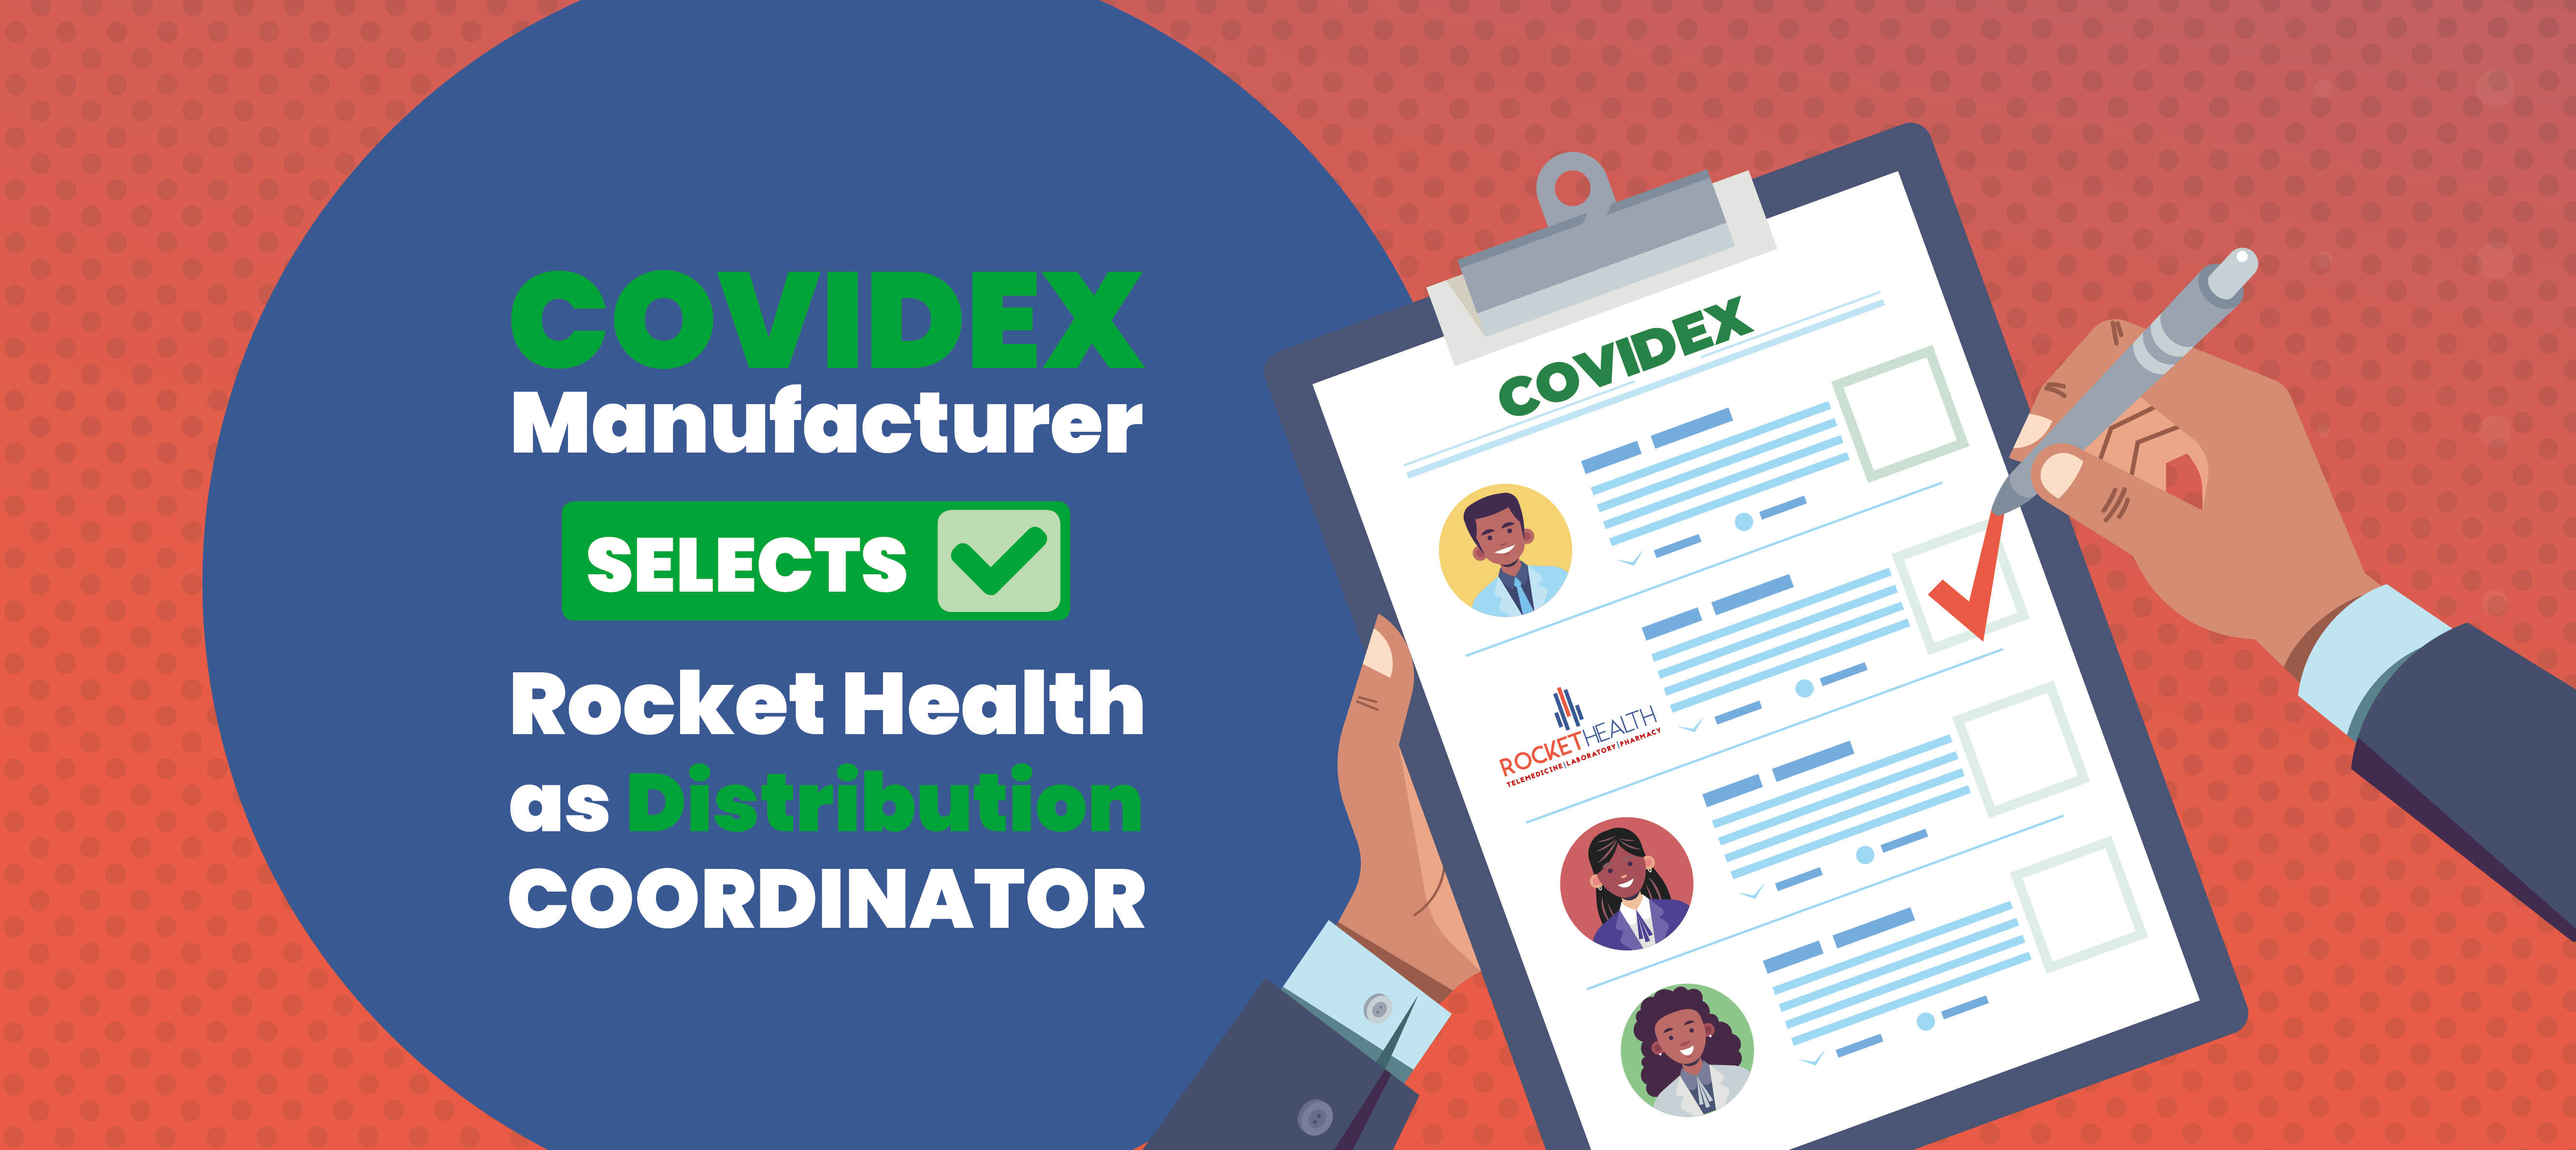 COVIDEX Manufacturer Selects Rocket Health as Distribution Coordinator